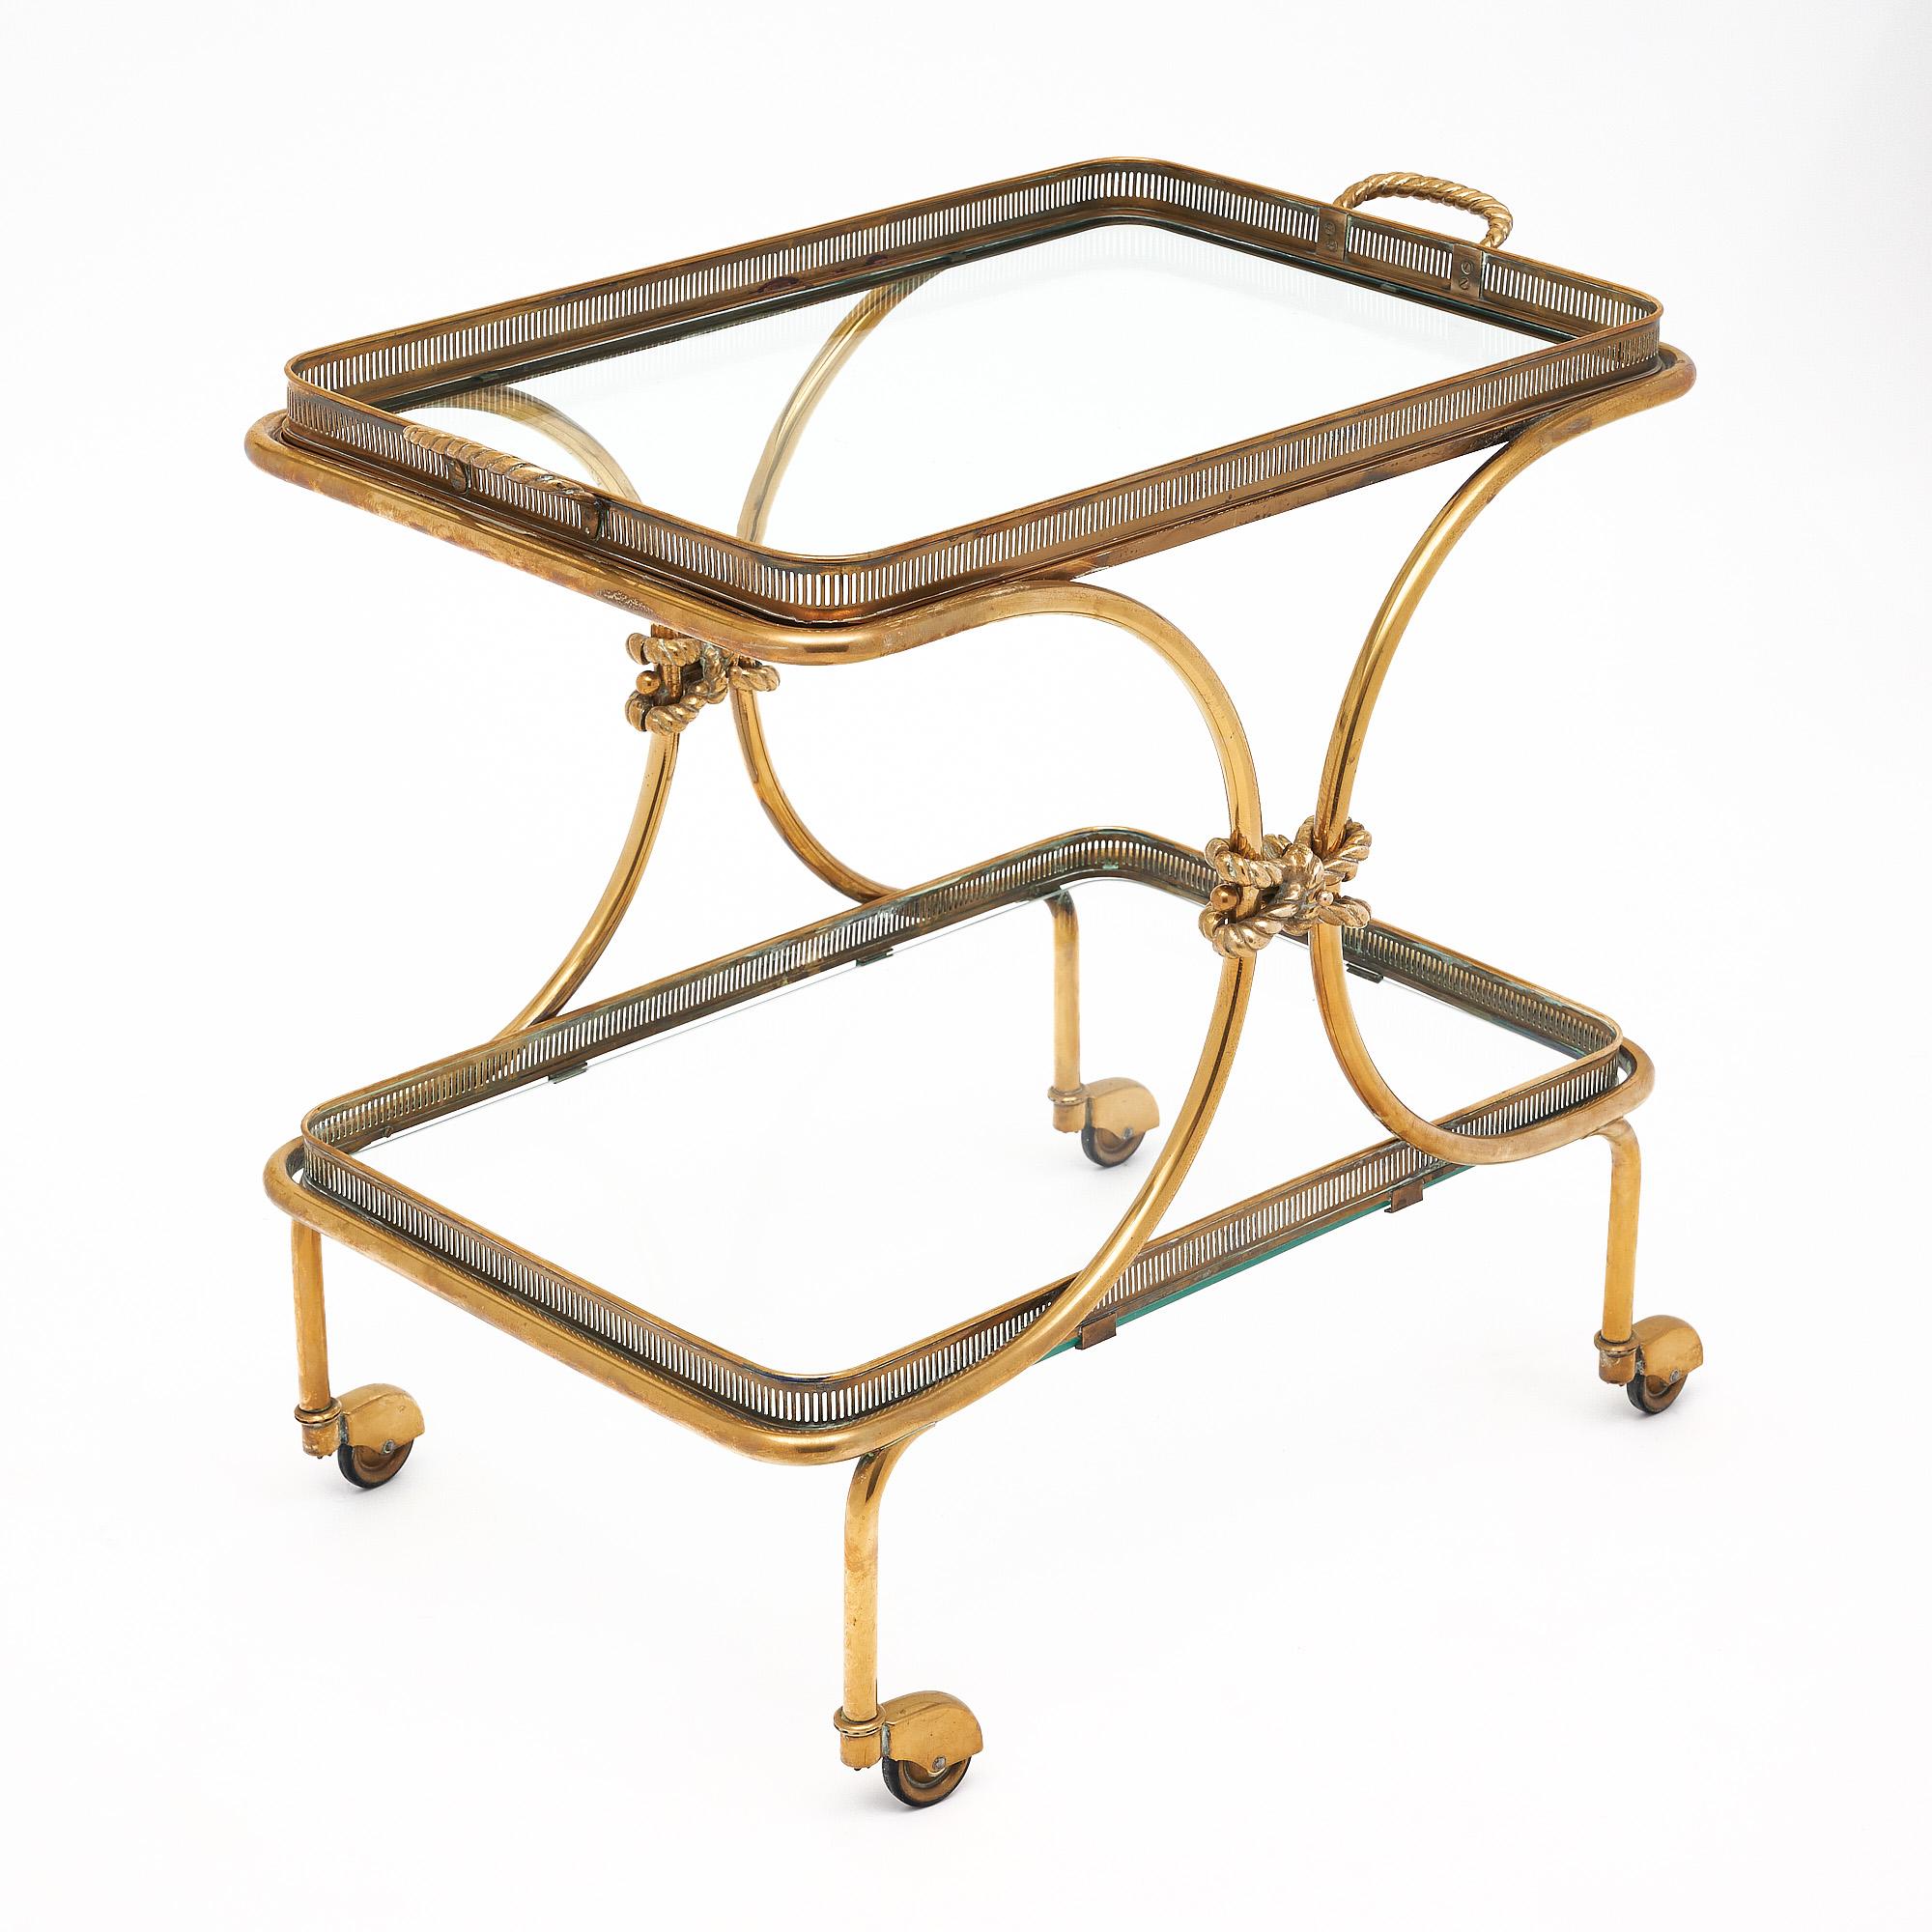 Brass bar cart from the Art Deco period in France. This piece is rectangular in shape with two shelves of glass. The top shelf lifts off as a tray for functionality. Both shelves feature open brass galleries. The structure has curved sides adorned